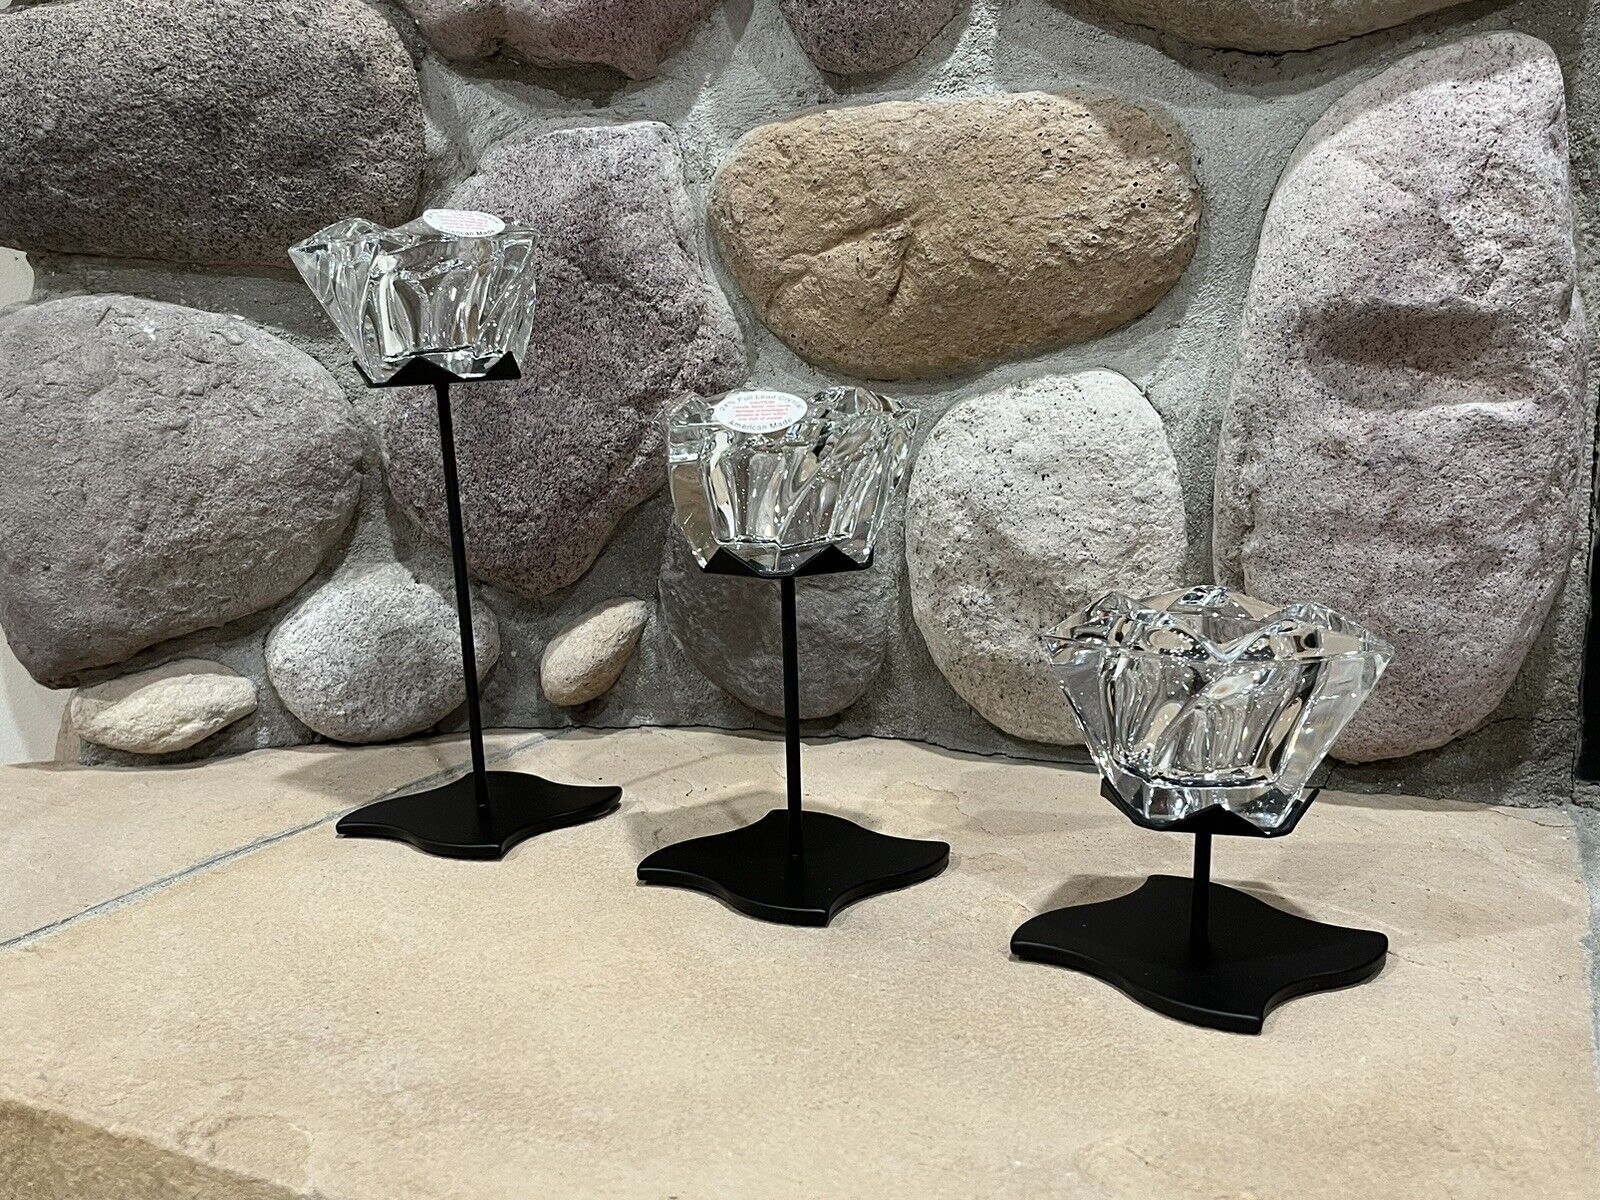 PartyLite Windswept Crystal Votive Holders with Black Metal Stands - 6 Piece Set